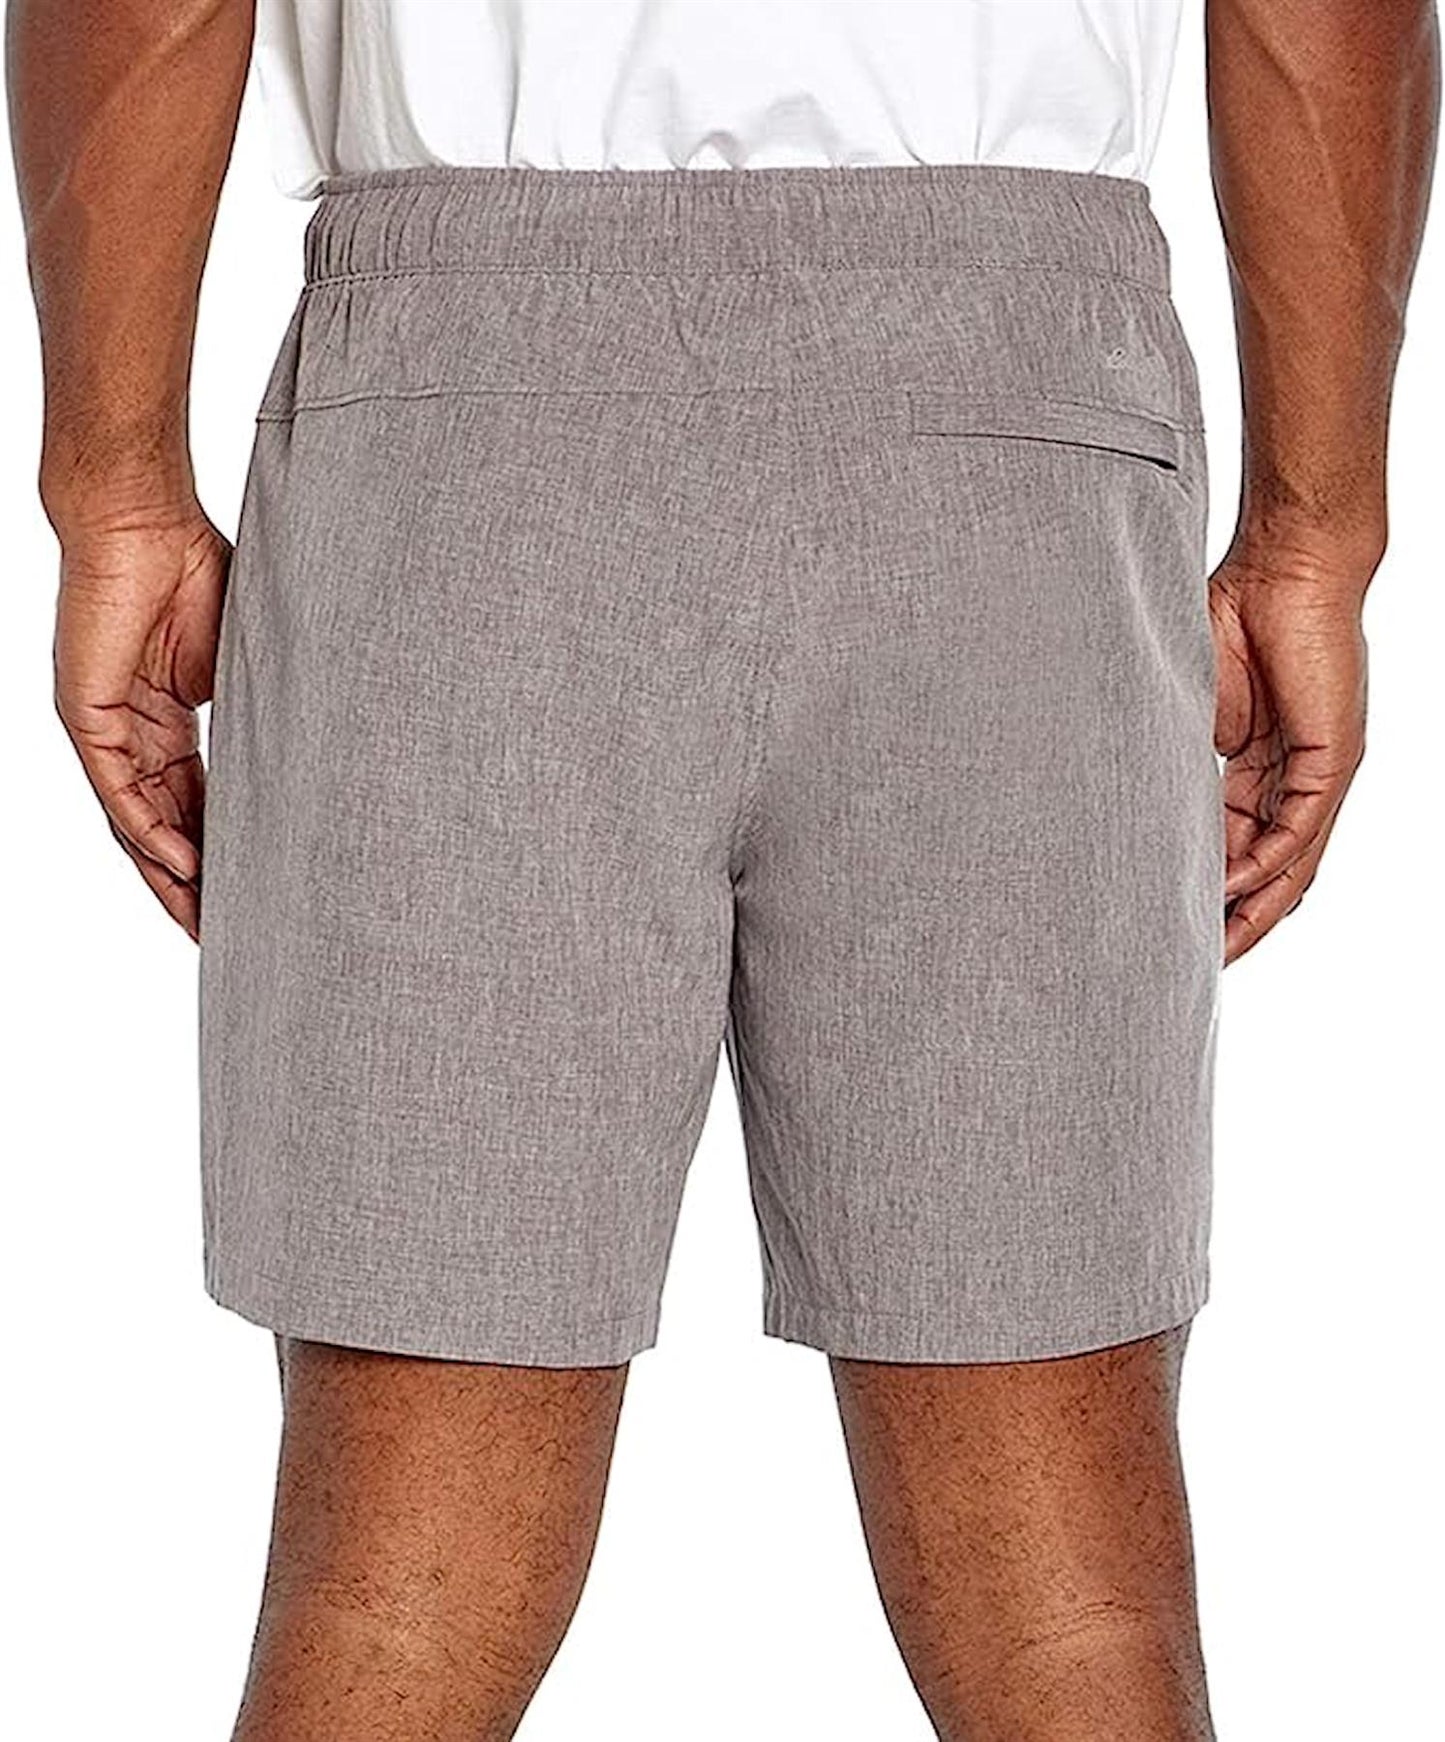 Eddie Bauer Men s UPF 50 Quick Dry Woven Tech Pull-On Shorts